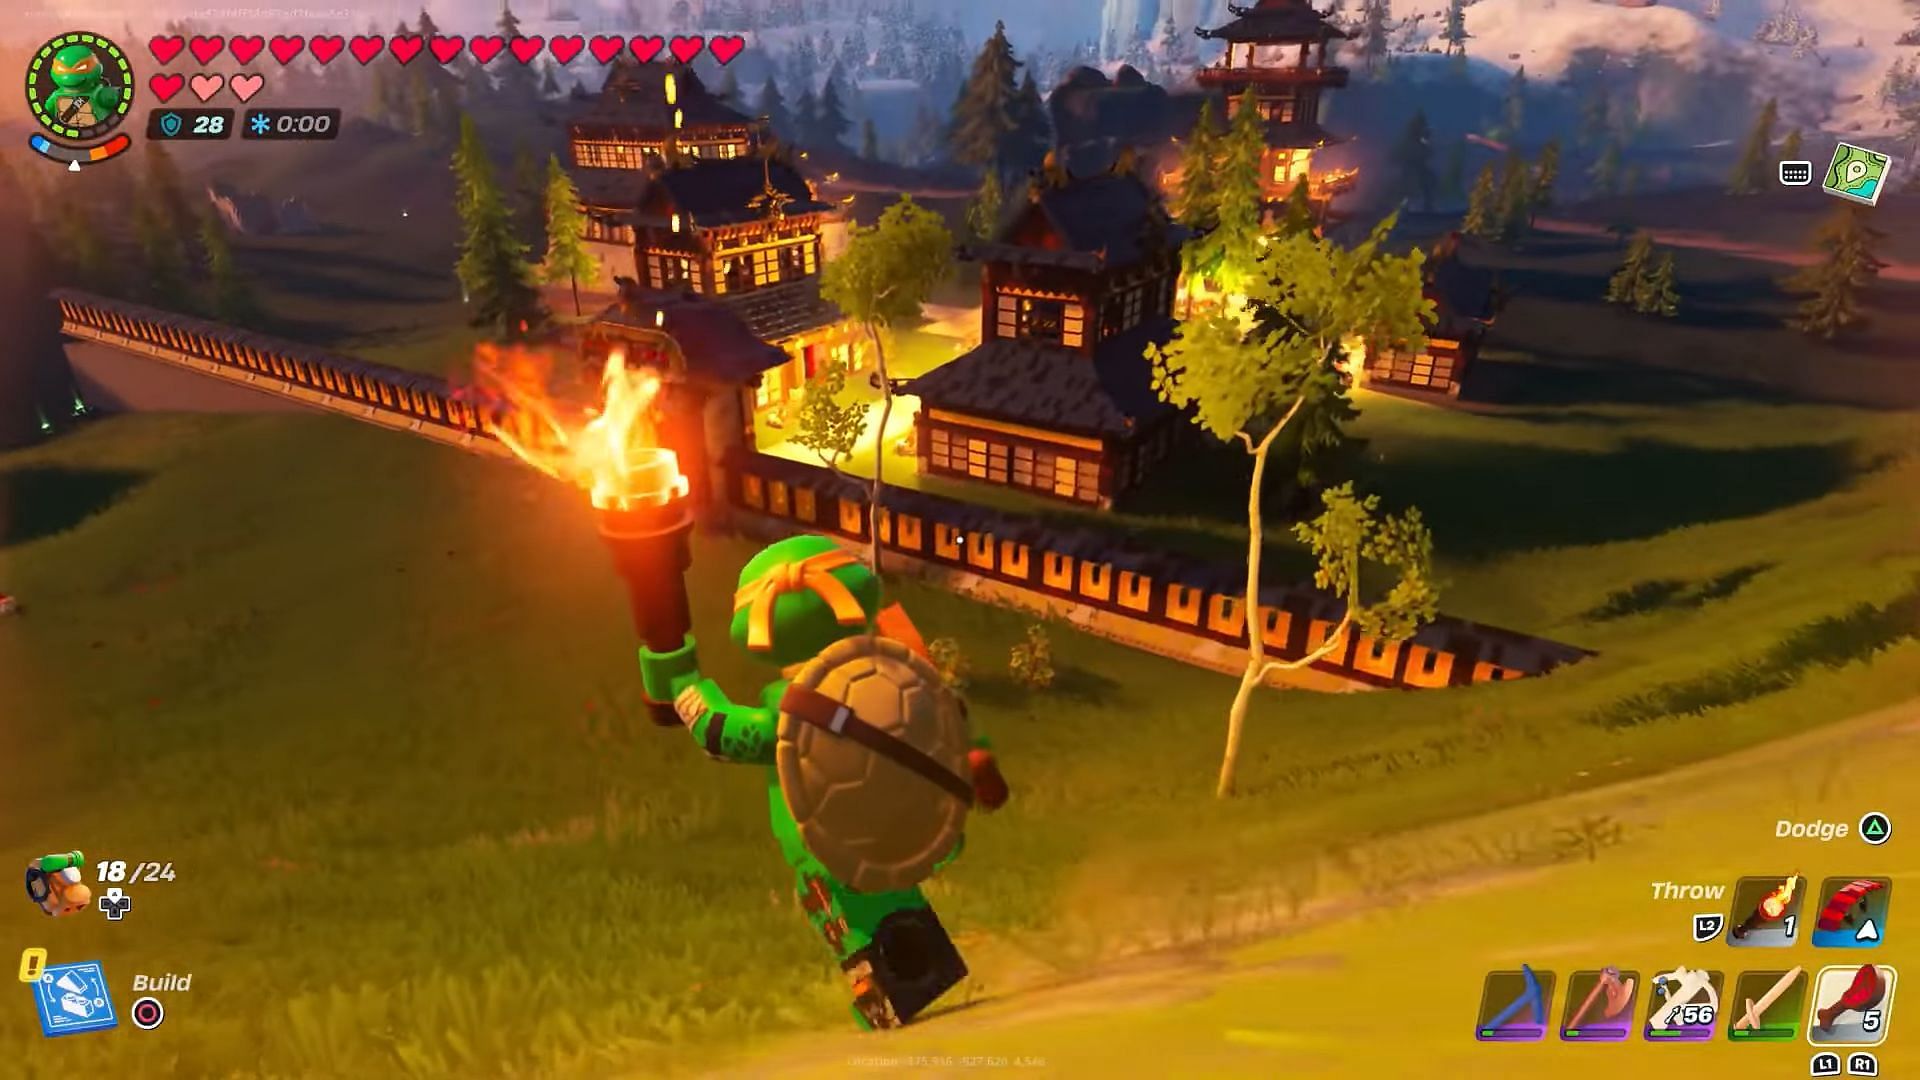 Shogun Palace Collection (Image via A1Getdismoney on YouTube || Epic Games)